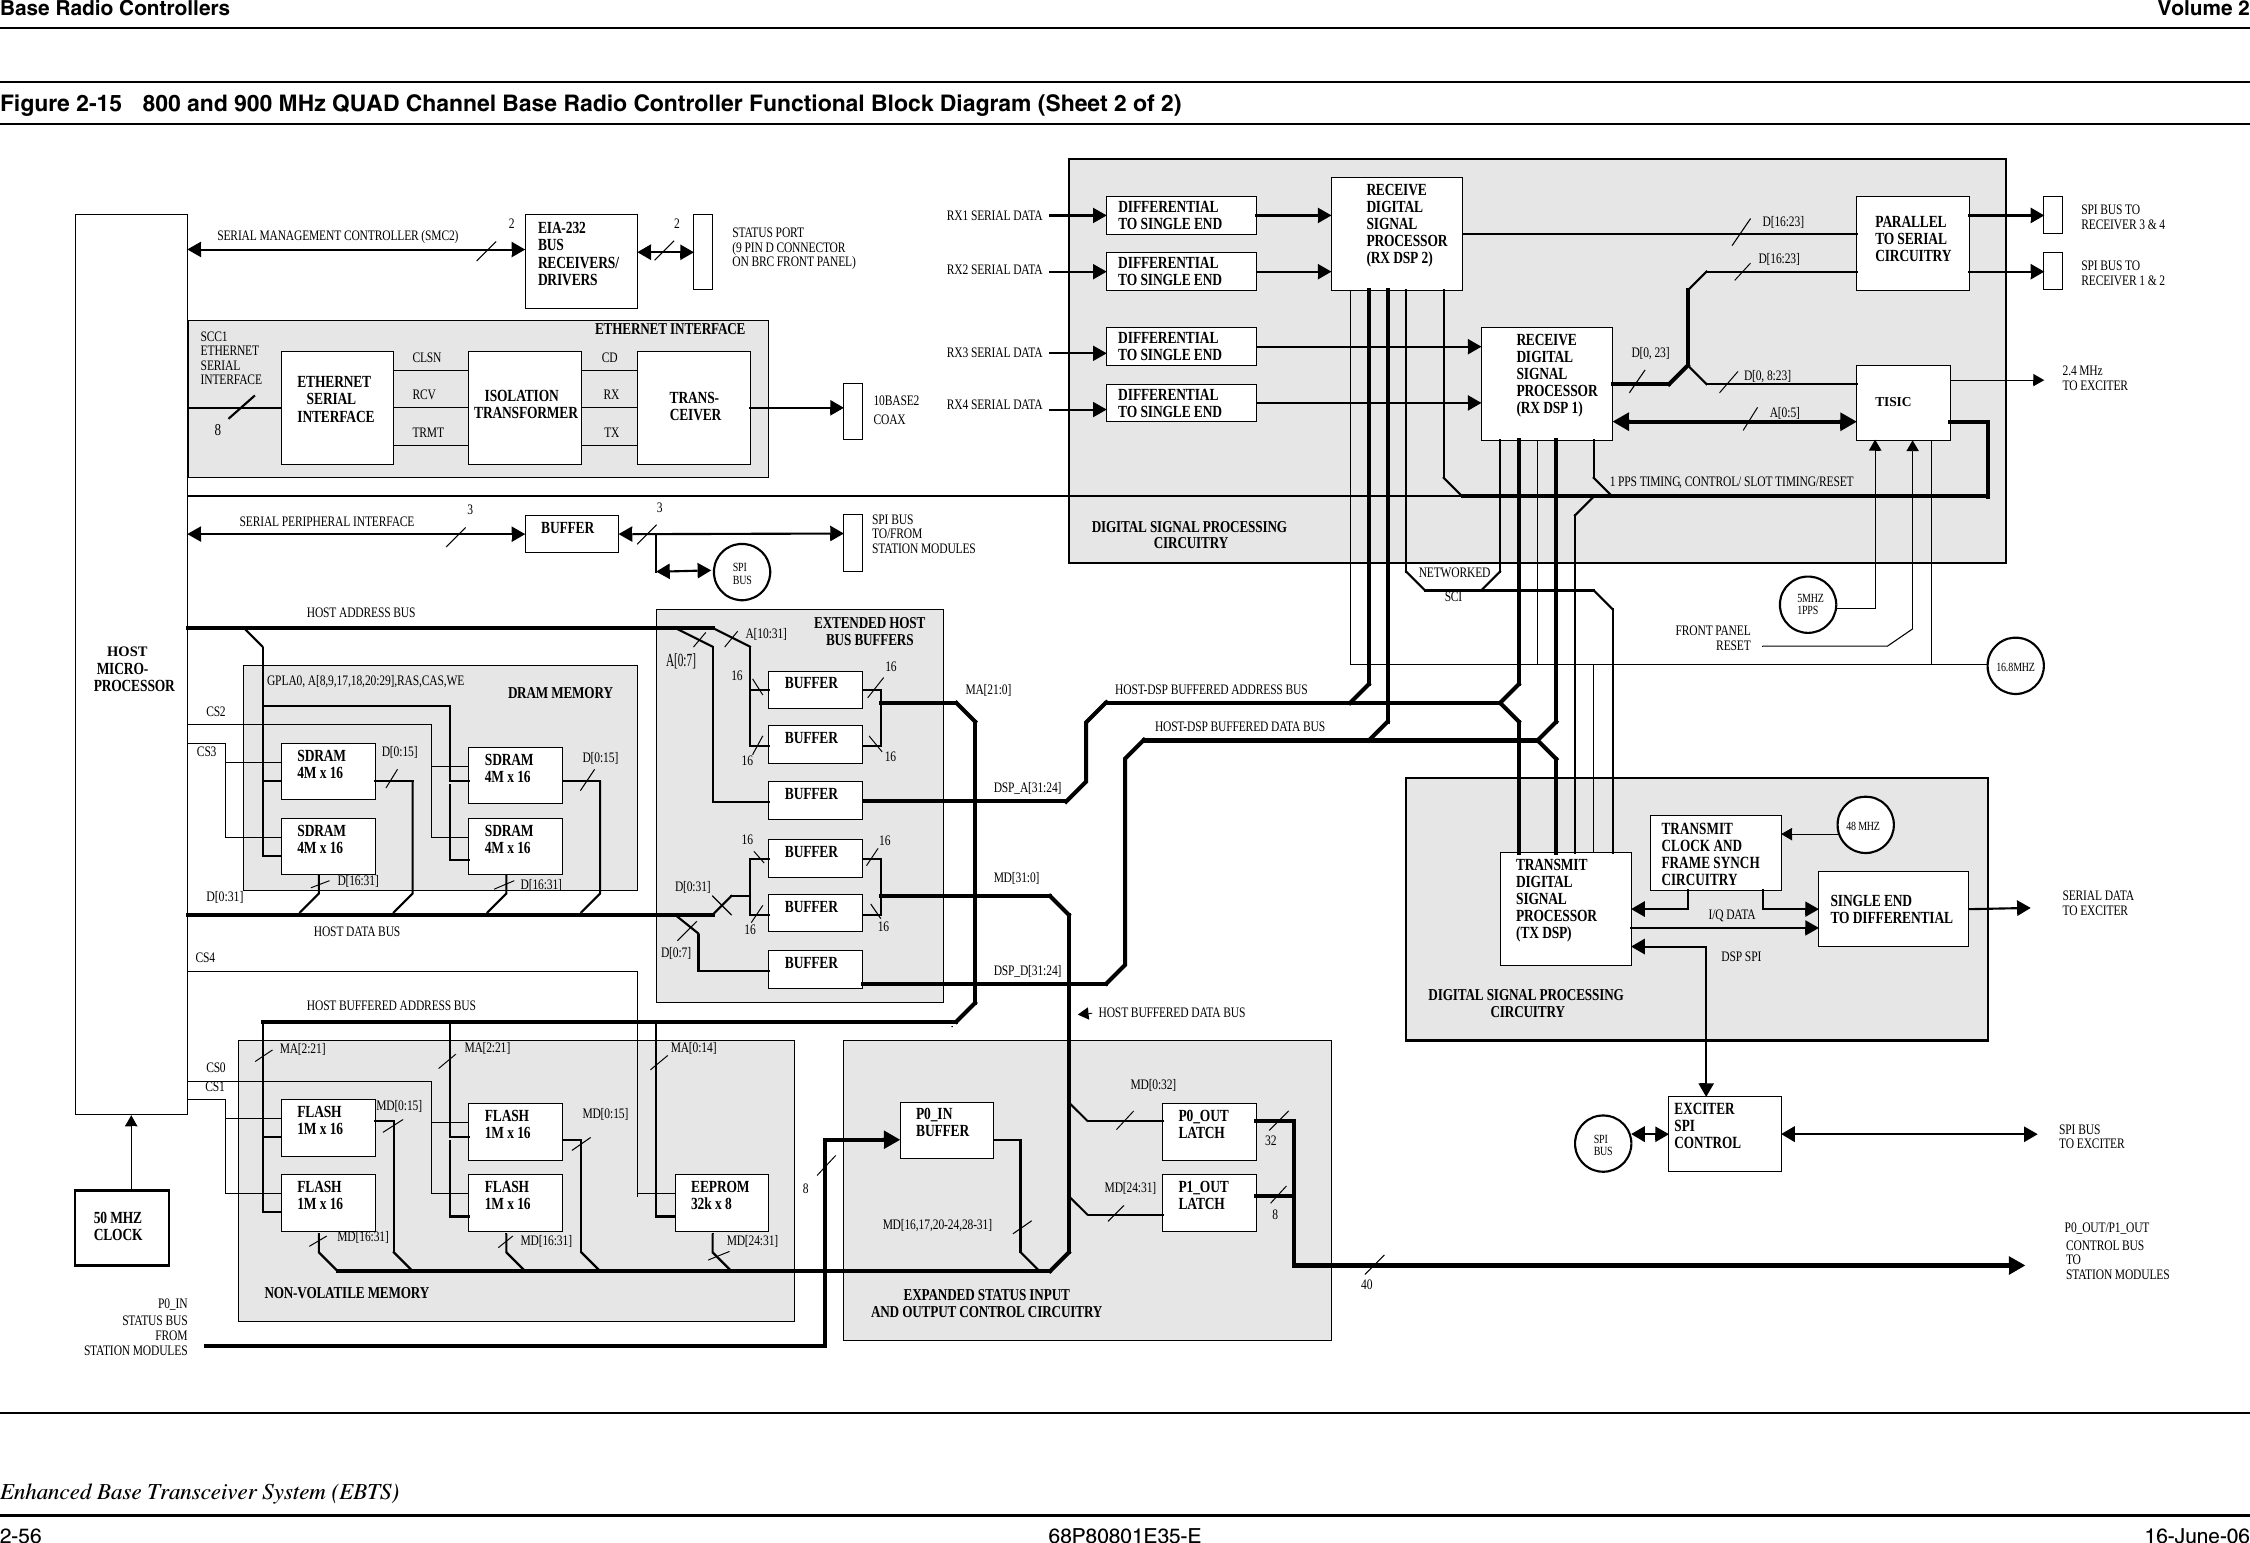 Base Radio Controllers Volume 2Enhanced Base Transceiver System (EBTS)2-56 68P80801E35-E 16-June-06Figure 2-15 800 and 900 MHz QUAD Channel Base Radio Controller Functional Block Diagram (Sheet 2 of 2) HOSTMICRO-ETHERNETSERIALINTERFACE TRANS-CDRCV RXTRMT TXCLSN10BASE2COAXETHERNETSERIALINTERFACECEIVERISOLATIONTRANSFORMERPROCESSORSCC18SDRAM4M x 16SDRAM4M x 16SDRAM4M x 16SDRAM4M x 16GPLA0, A[8,9,17,18,20:29],RAS,CAS,WECS2CS3D[0:31]D[0:15]D[16:31]D[0:15]D[16:31]BUFFERBUFFERBUFFERBUFFERBUFFERBUFFERD[0:31]D[0:7]A[10:31]MA[21:0]DSP_D[31:24]A[0:7]DSP_A[31:24]MD[31:0]EIA-232BUSRECEIVERS/DRIVERS2STATUS PORT(9 PIN D CONNECTORON BRC FRONT PANEL)2BUFFER33SPI BUS TO/FROM STATION MODULESFLASH1M x 16FLASH1M x 16FLASH1M x 16FLASH1M x 16CS0CS1MD[0:15]MD[16:31]MD[0:15]MD[16:31]1616161616 161616MA[2:21]MA[2:21]EEPROM32k x 8MD[24:31]MA[0:14]CS4P1_OUTLATCHP0_OUTLATCHMD[0:32]MD[24:31]P0_INBUFFERMD[16,17,20-24,28-31]STATUS BUSFROMSTATION MODULESP0_IN8CONTROL BUSTOSTATION MODULESP0_OUT/P1_OUT328TRANSMITDIGITALSIGNALPROCESSOR(TX DSP)SINGLE ENDTO DIFFERENTIALTRANSMITCLOCK ANDFRAME SYNCHCIRCUITRYI/Q DATASERIAL DATATO EXCITERDIFFERENTIALTO SINGLE ENDRX1 SERIAL DATARECEIVEDIGITALSIGNALPROCESSOR(RX DSP 1)RECEIVEDIGITALSIGNALPROCESSOR(RX DSP 2)TISICA[0:5]D[0, 8:23]PARALLELTO SERIALCIRCUITRYD[16:23]D[16:23]D[0, 23]SPI BUS TORECEIVER 1 &amp; 2SPI BUS TORECEIVER 3 &amp; 42.4 MHz1 PPS TIMING, CONTROL/ SLOT TIMING/RESETNETWORKEDSCI16.8MHZ48 MHZSPIBUSSPIBUSEXCITERSPICONTROLDSP SPISPI BUSTO EXCITERDIGITAL SIGNAL PROCESSING CIRCUITRYDIGITAL SIGNAL PROCESSING CIRCUITRYDIFFERENTIALTO SINGLE ENDDIFFERENTIALTO SINGLE ENDDIFFERENTIALTO SINGLE END50 MHZCLOCKFRONT PANELRESETDRAM MEMORYETHERNET INTERFACENON-VOLATILE MEMORY EXPANDED STATUS INPUTAND OUTPUT CONTROL CIRCUITRYEXTENDED HOSTBUS BUFFERS40TO EXCITER5MHZ1PPSRX2 SERIAL DATARX3 SERIAL DATARX4 SERIAL DATAHOST ADDRESS BUSHOST DATA BUSHOST BUFFERED DATA BUSHOST BUFFERED ADDRESS BUSHOST-DSP BUFFERED DATA BUSHOST-DSP BUFFERED ADDRESS BUSSERIAL MANAGEMENT CONTROLLER (SMC2)SERIAL PERIPHERAL INTERFACE